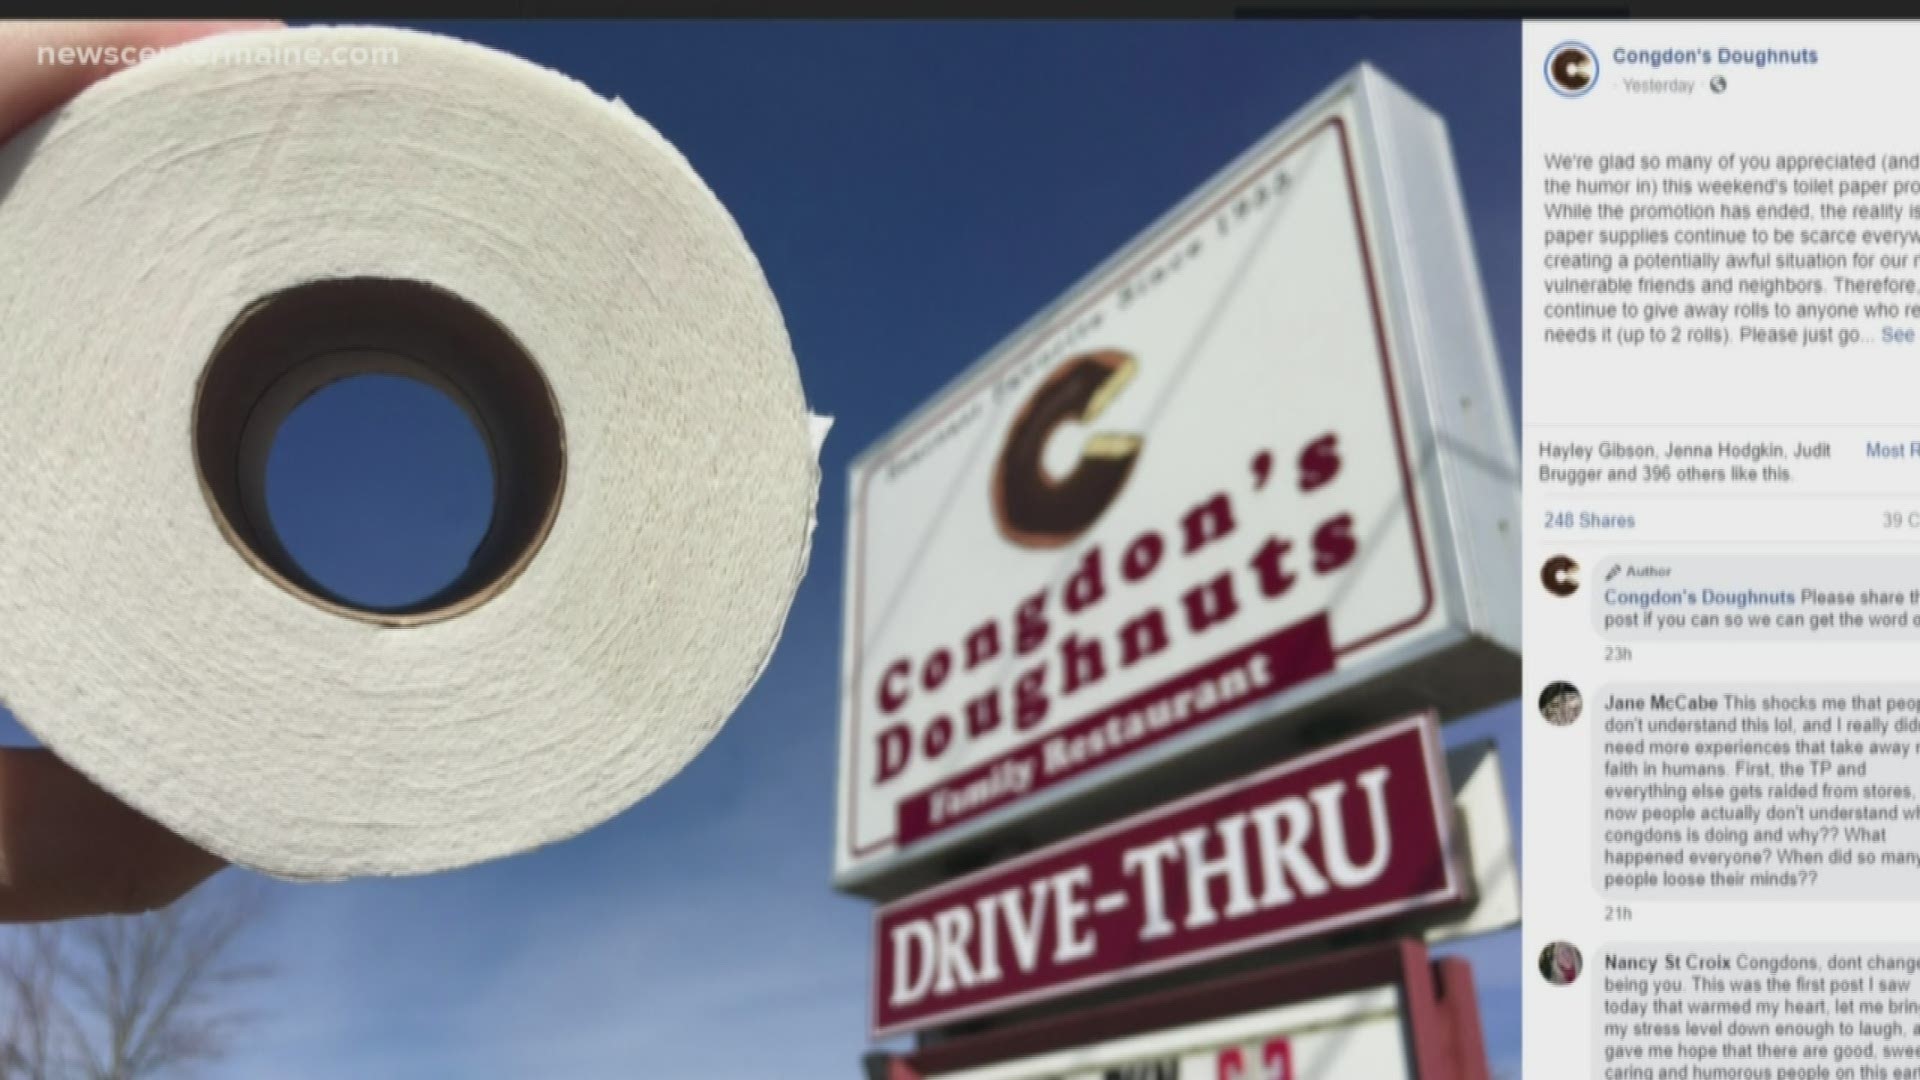 Restaurant owner Gary Leech handed out rolls of toilet paper with a purchase of a dozen doughnuts over the weekend. Now he is giving it to anyone in need.